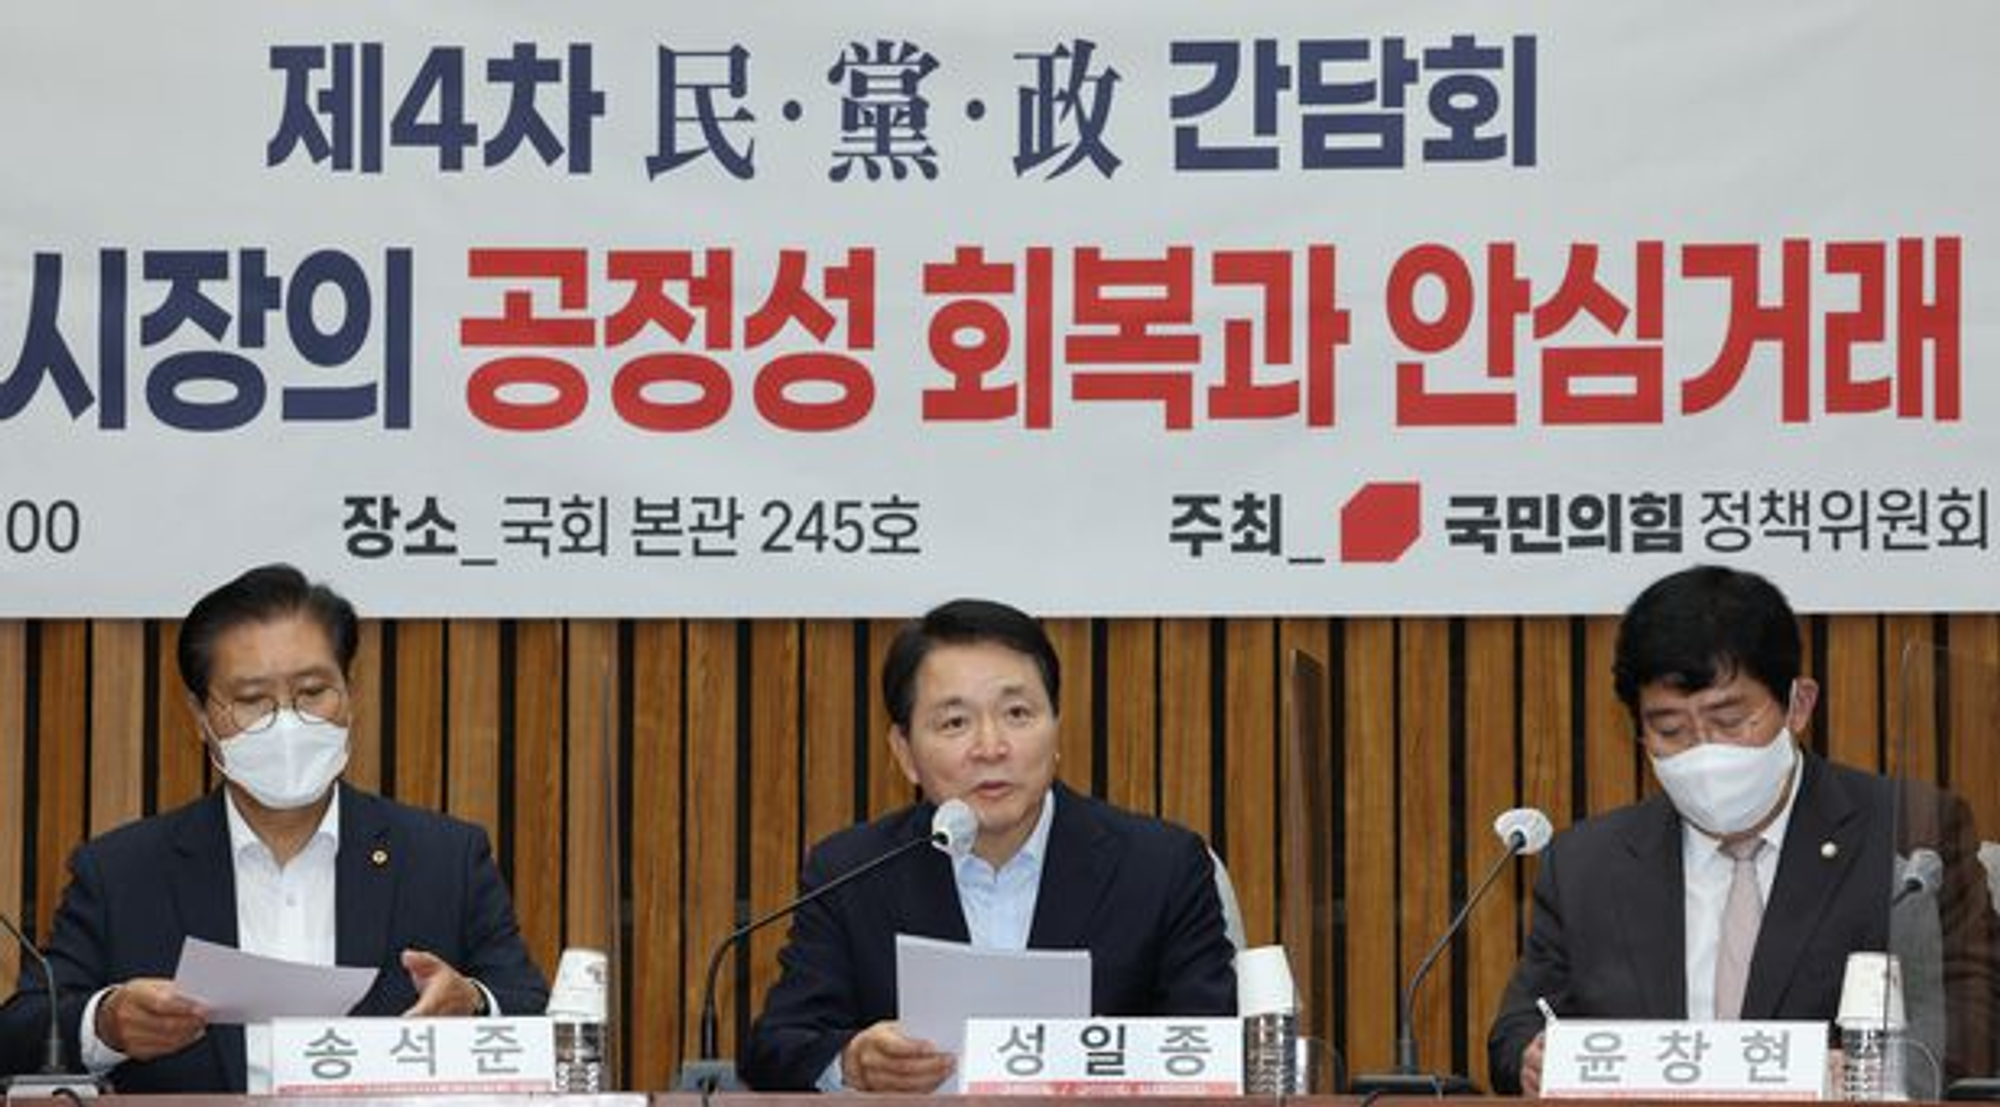 [On November 14th, at the 4th Civil-Government-Political Special Committee for Digital Assets at the National Assembly, the Chairman of the Policy Committee of the People Power Party, Seong Il-jung, made a statement. Source=Yonhap News]